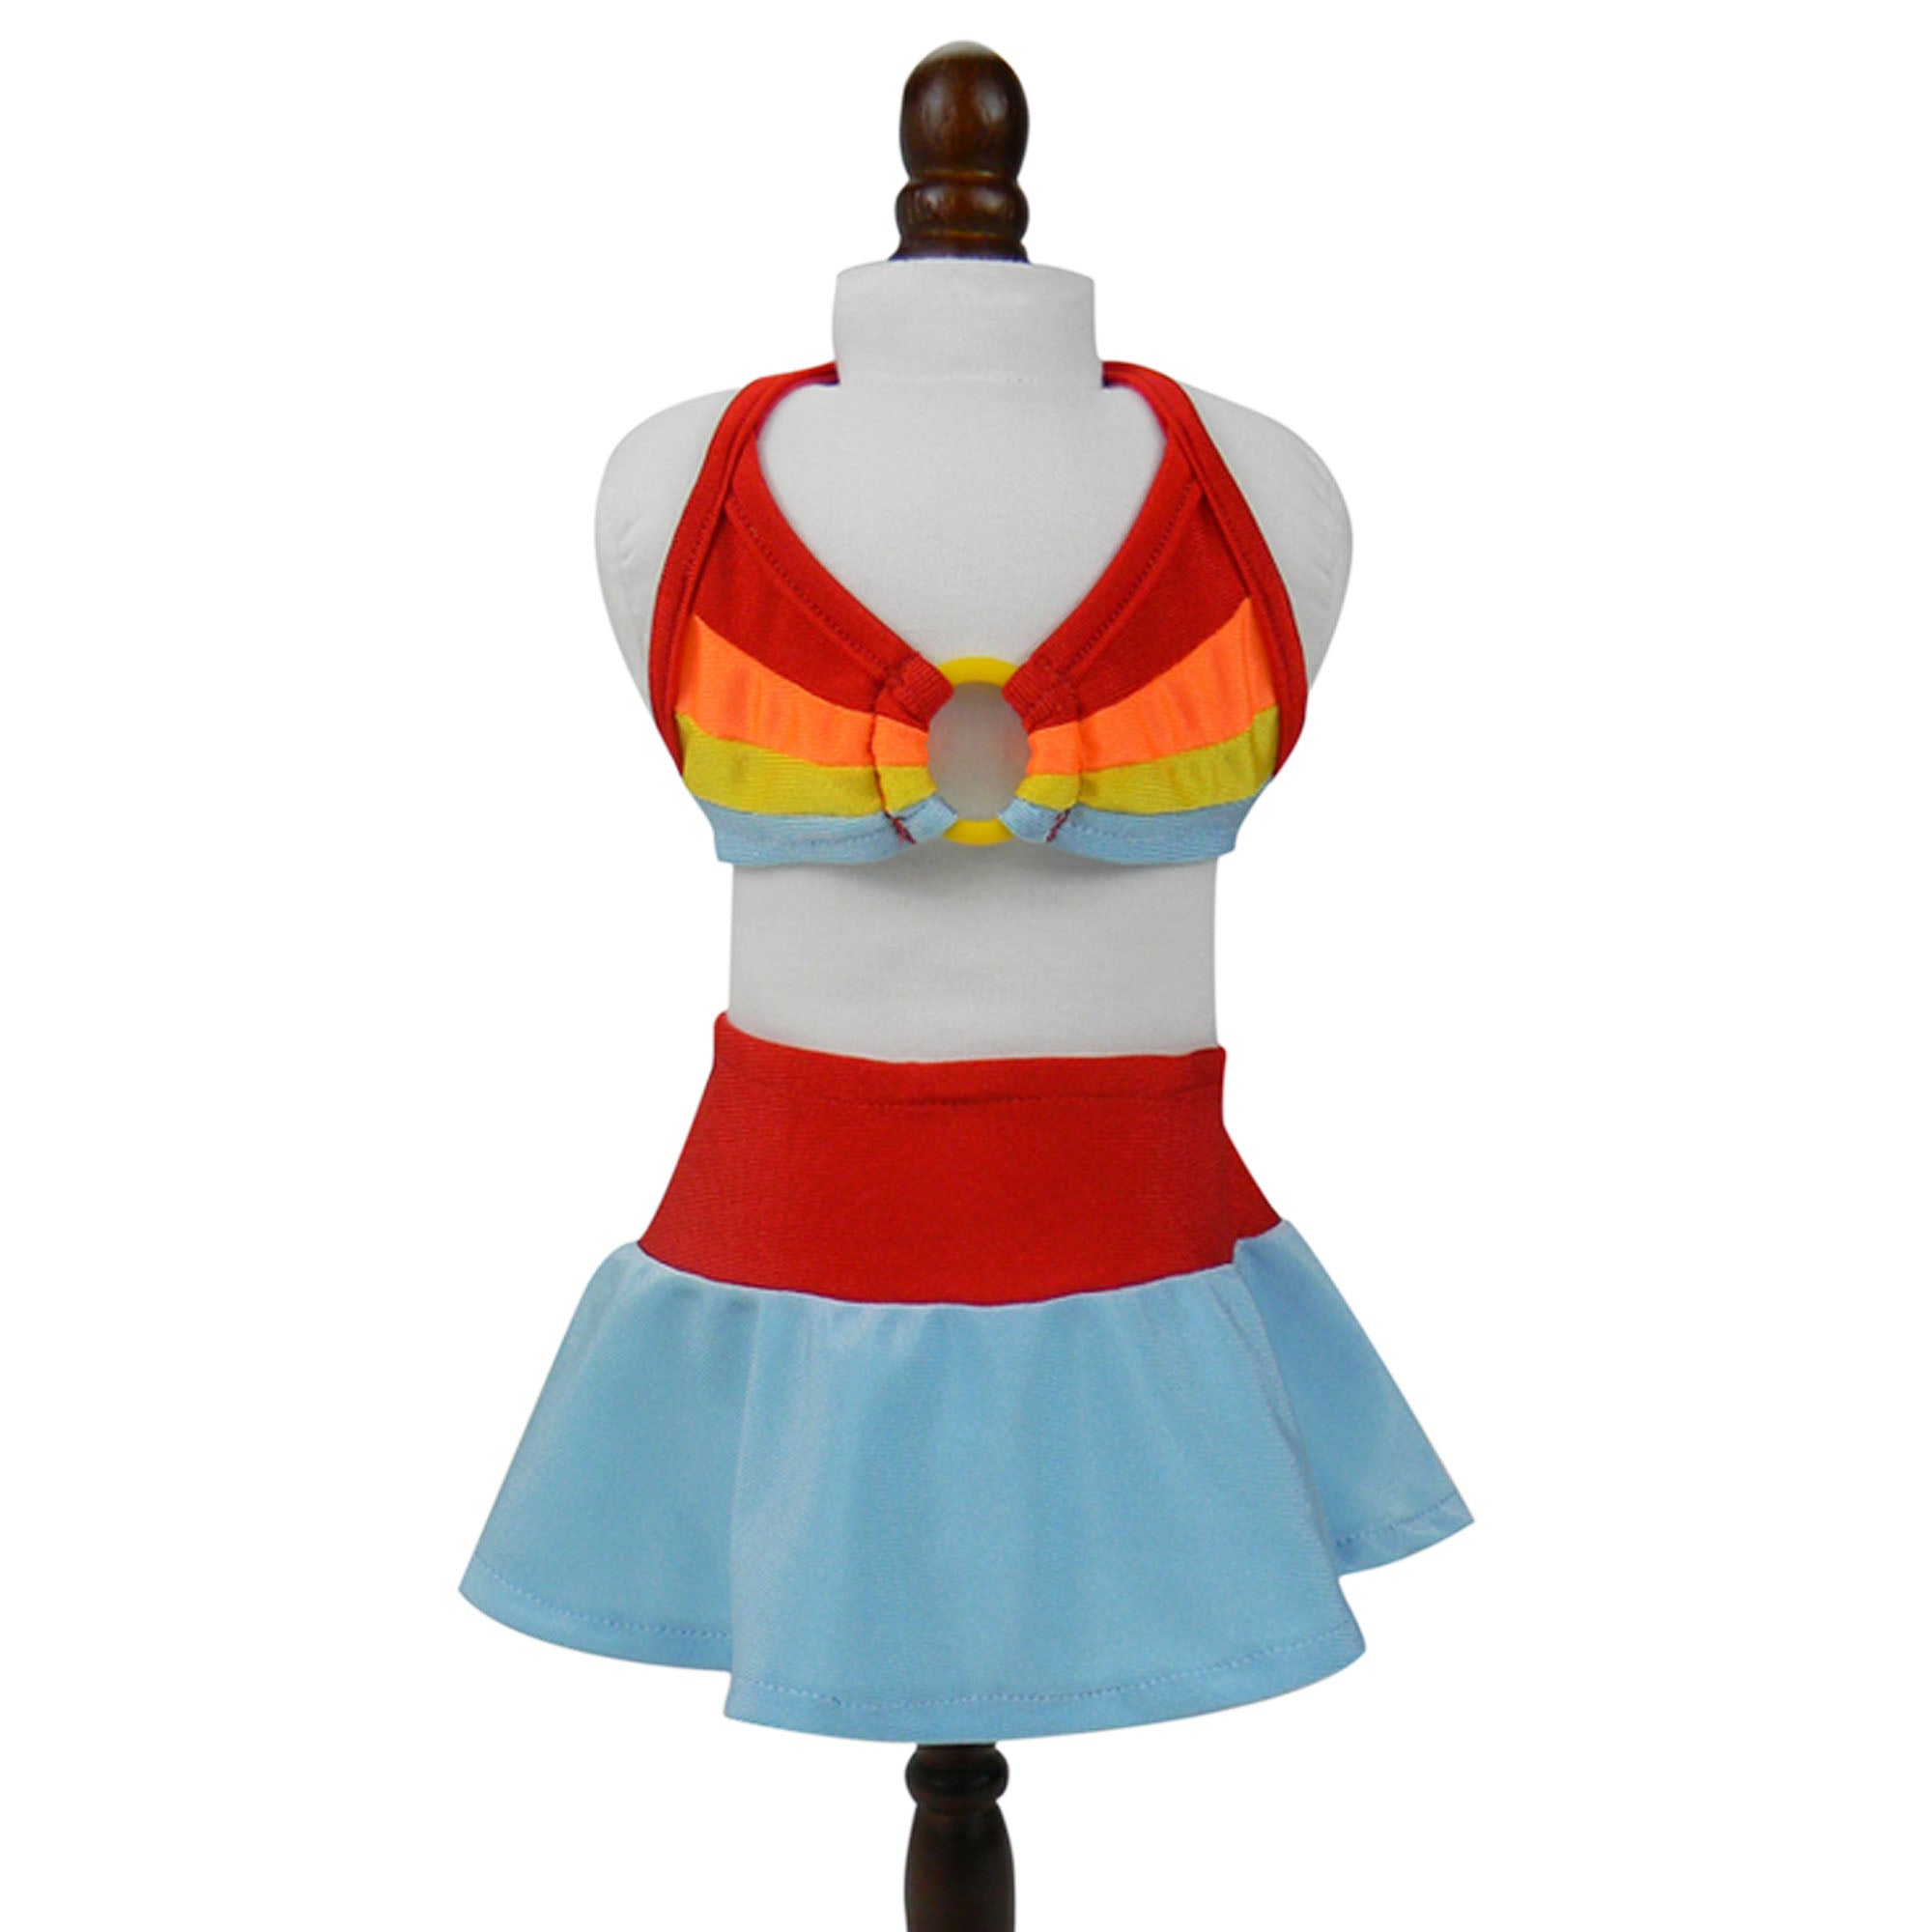 Sophia’s Two-Piece Bikini & Matching Circle Skirt Cover-Up Summer Swim Bathing Suit Outfit for 18” Dolls, Rainbow